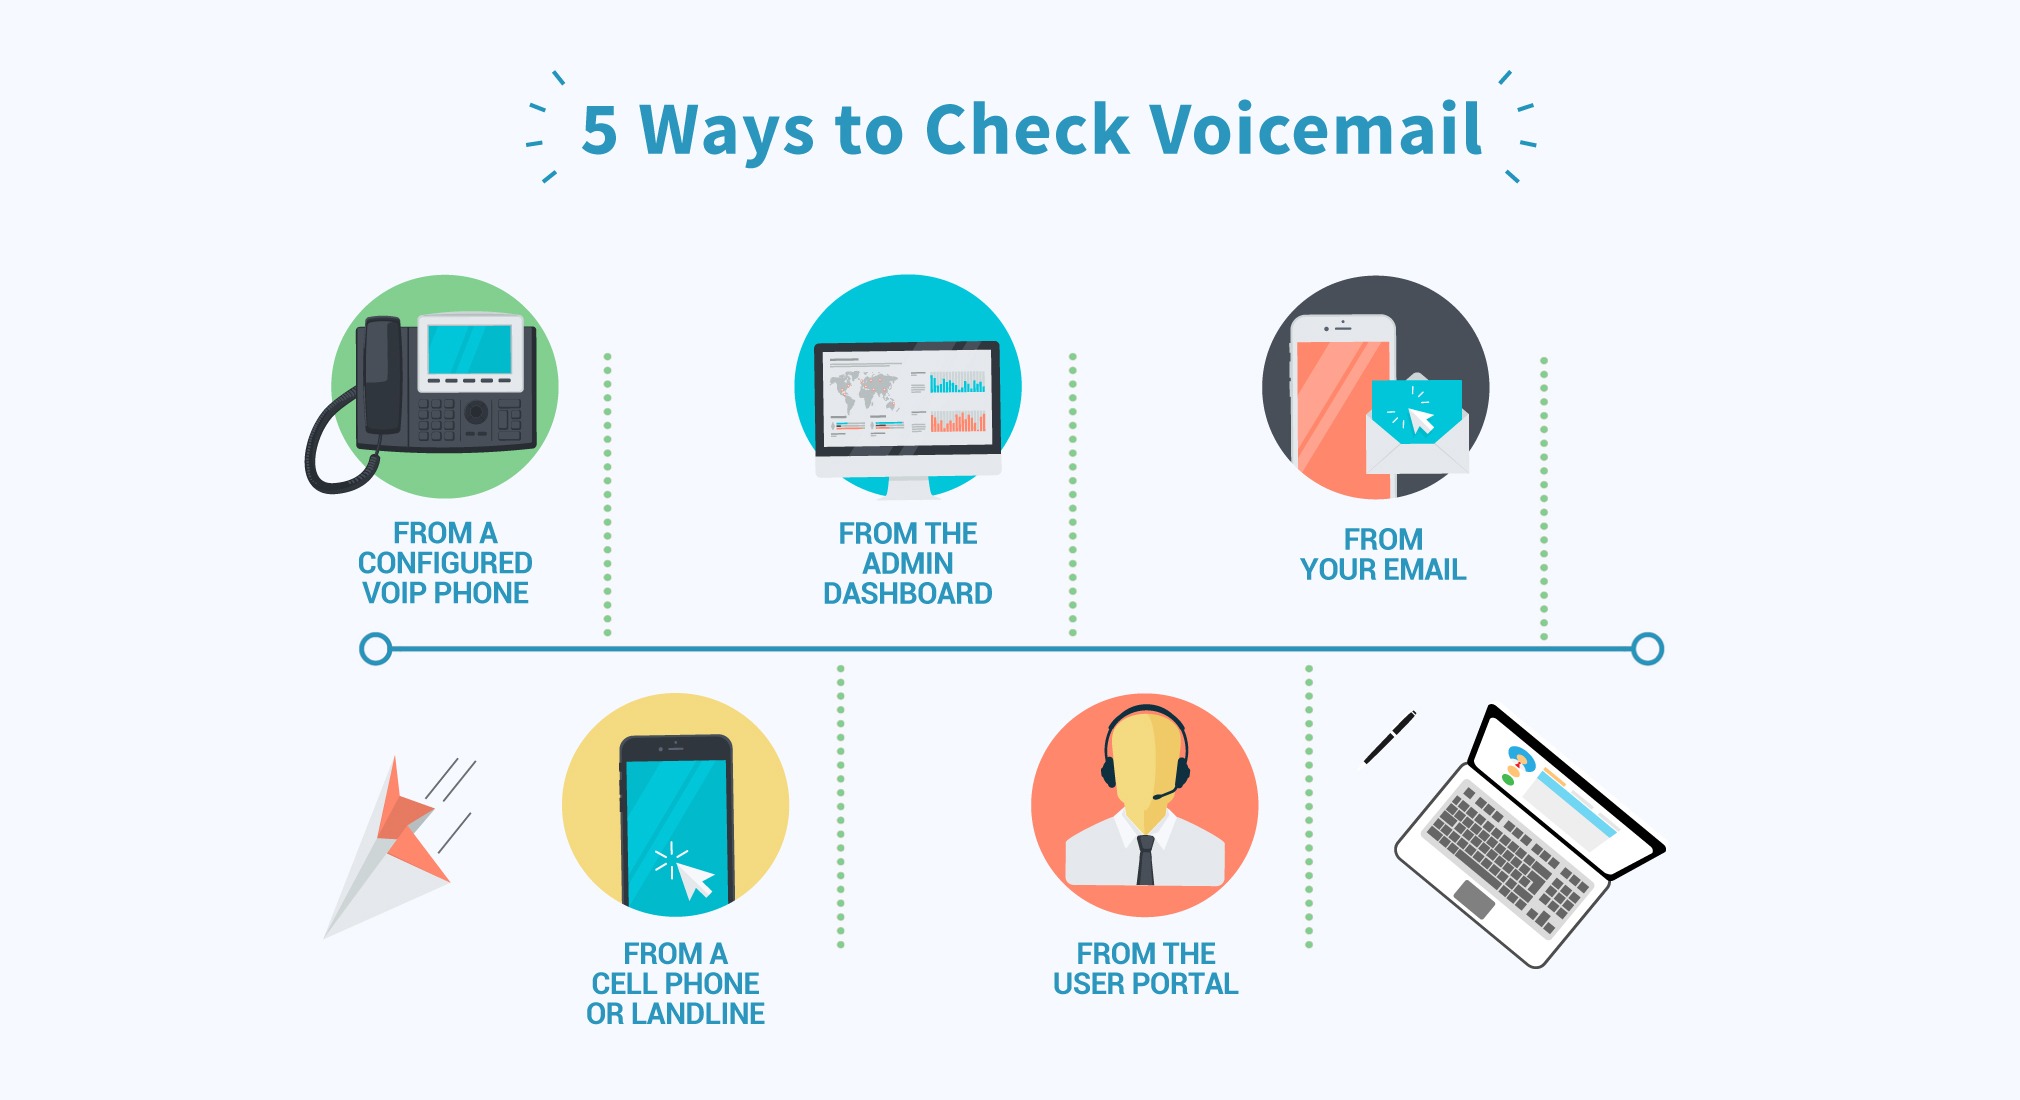 Voicemail Systems: 5 Ways to Check Voicemail Infographic